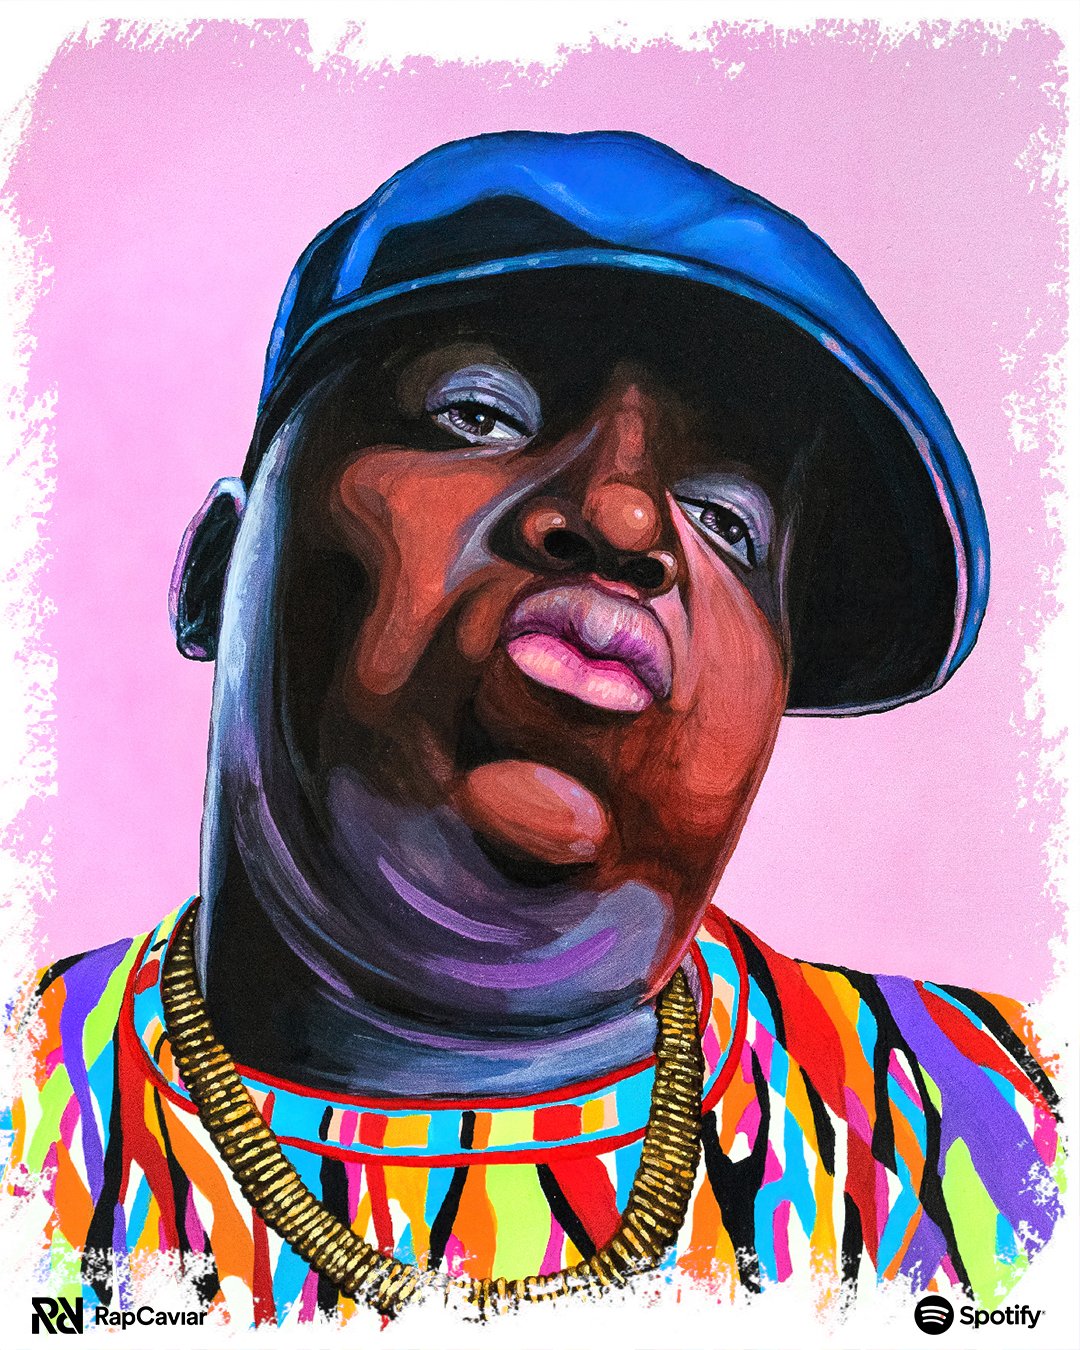 Happy 49th birthday to the legendary Notorious B.I.G. His lyrics, cadence, and style will live on forever 